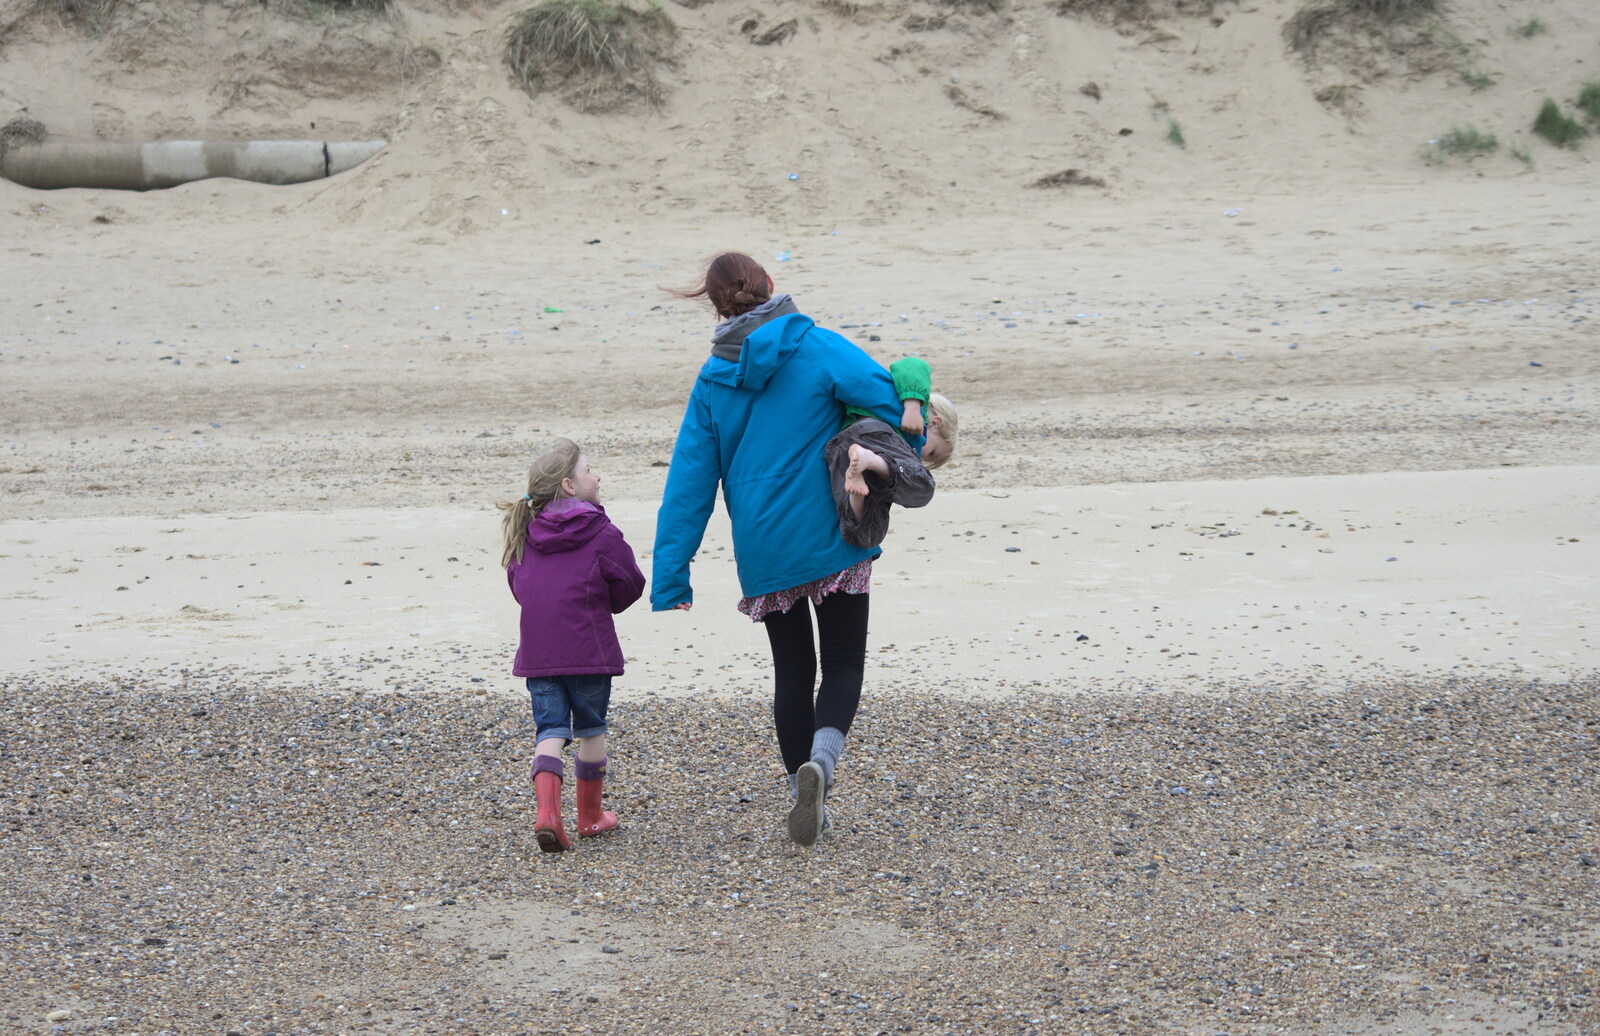 Isobel hauls Harry up the beach from A Wet Weekend of Camping, Waxham Sands, Norfolk - 13th June 2015